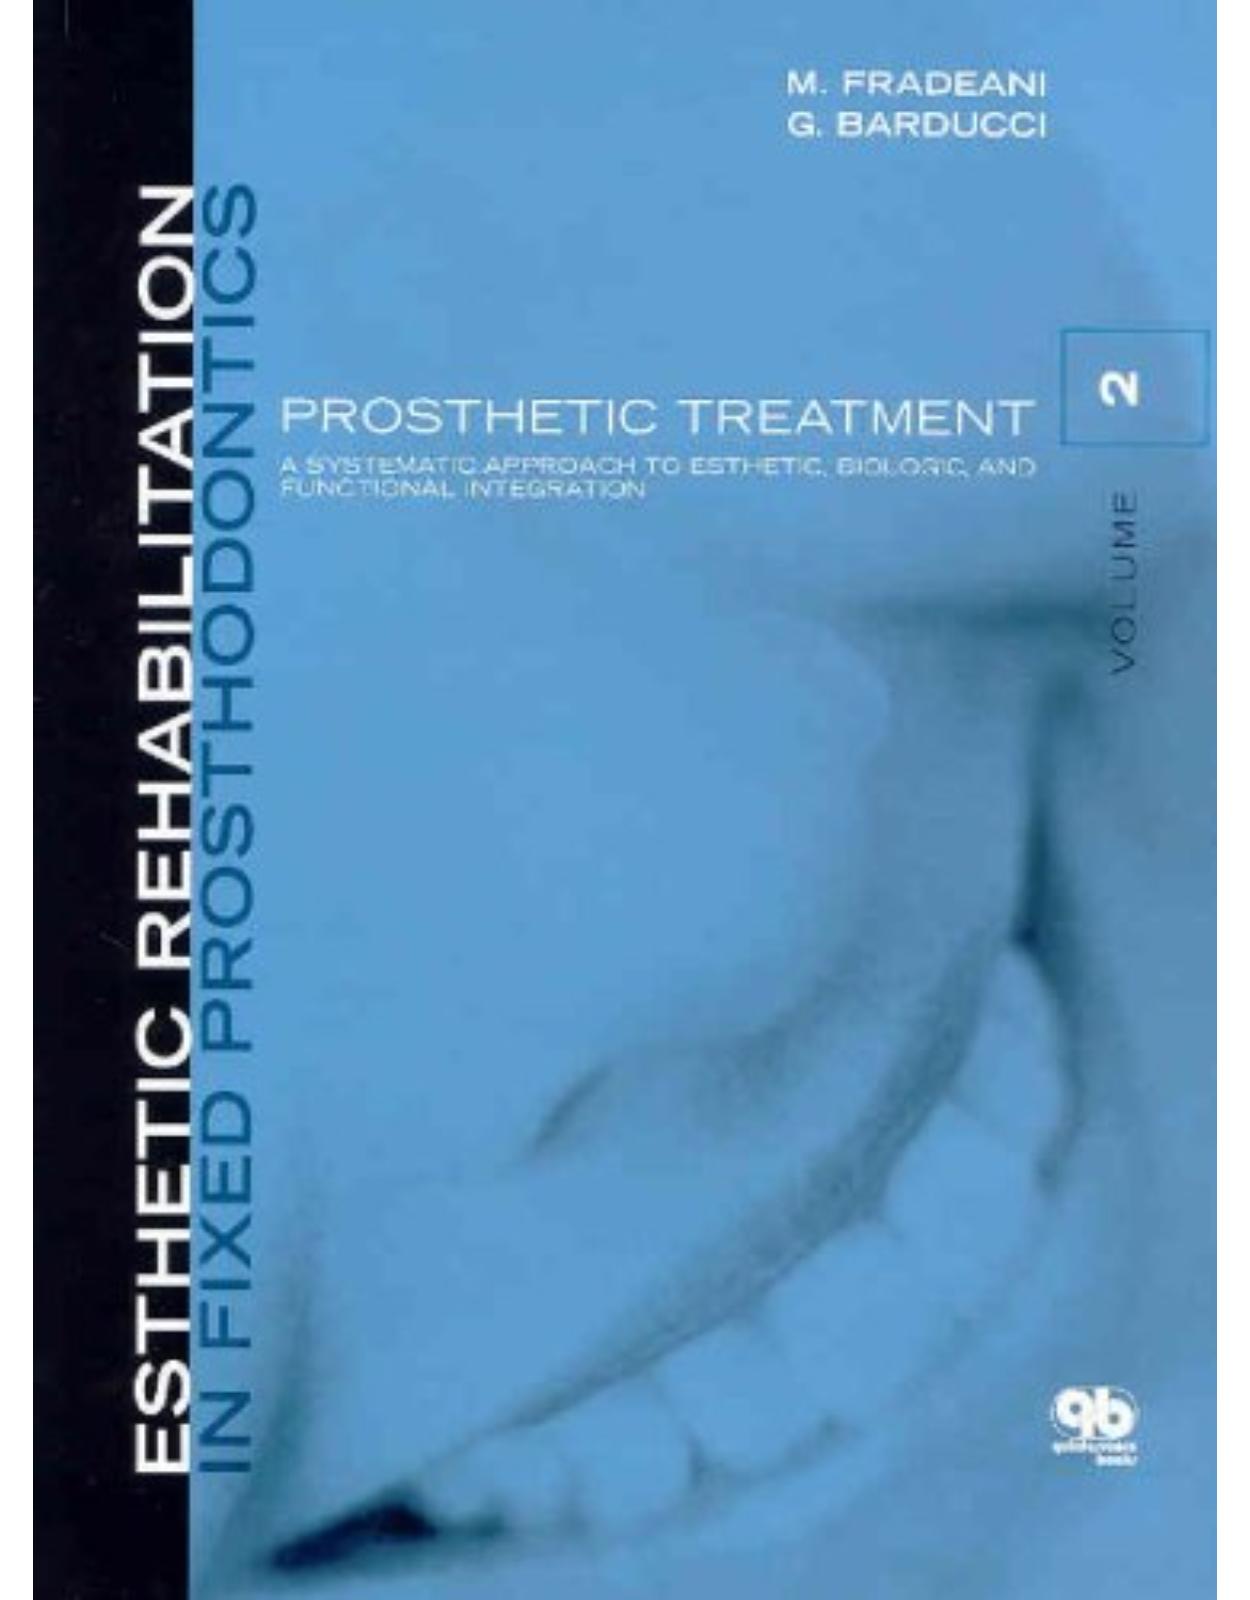 Esthetic Rehabilitation in Fixed Prosthodontics: Prosthetic Treatment - A Systematic Approach to Esthetic, Biologic, and Functional Integration v. 2